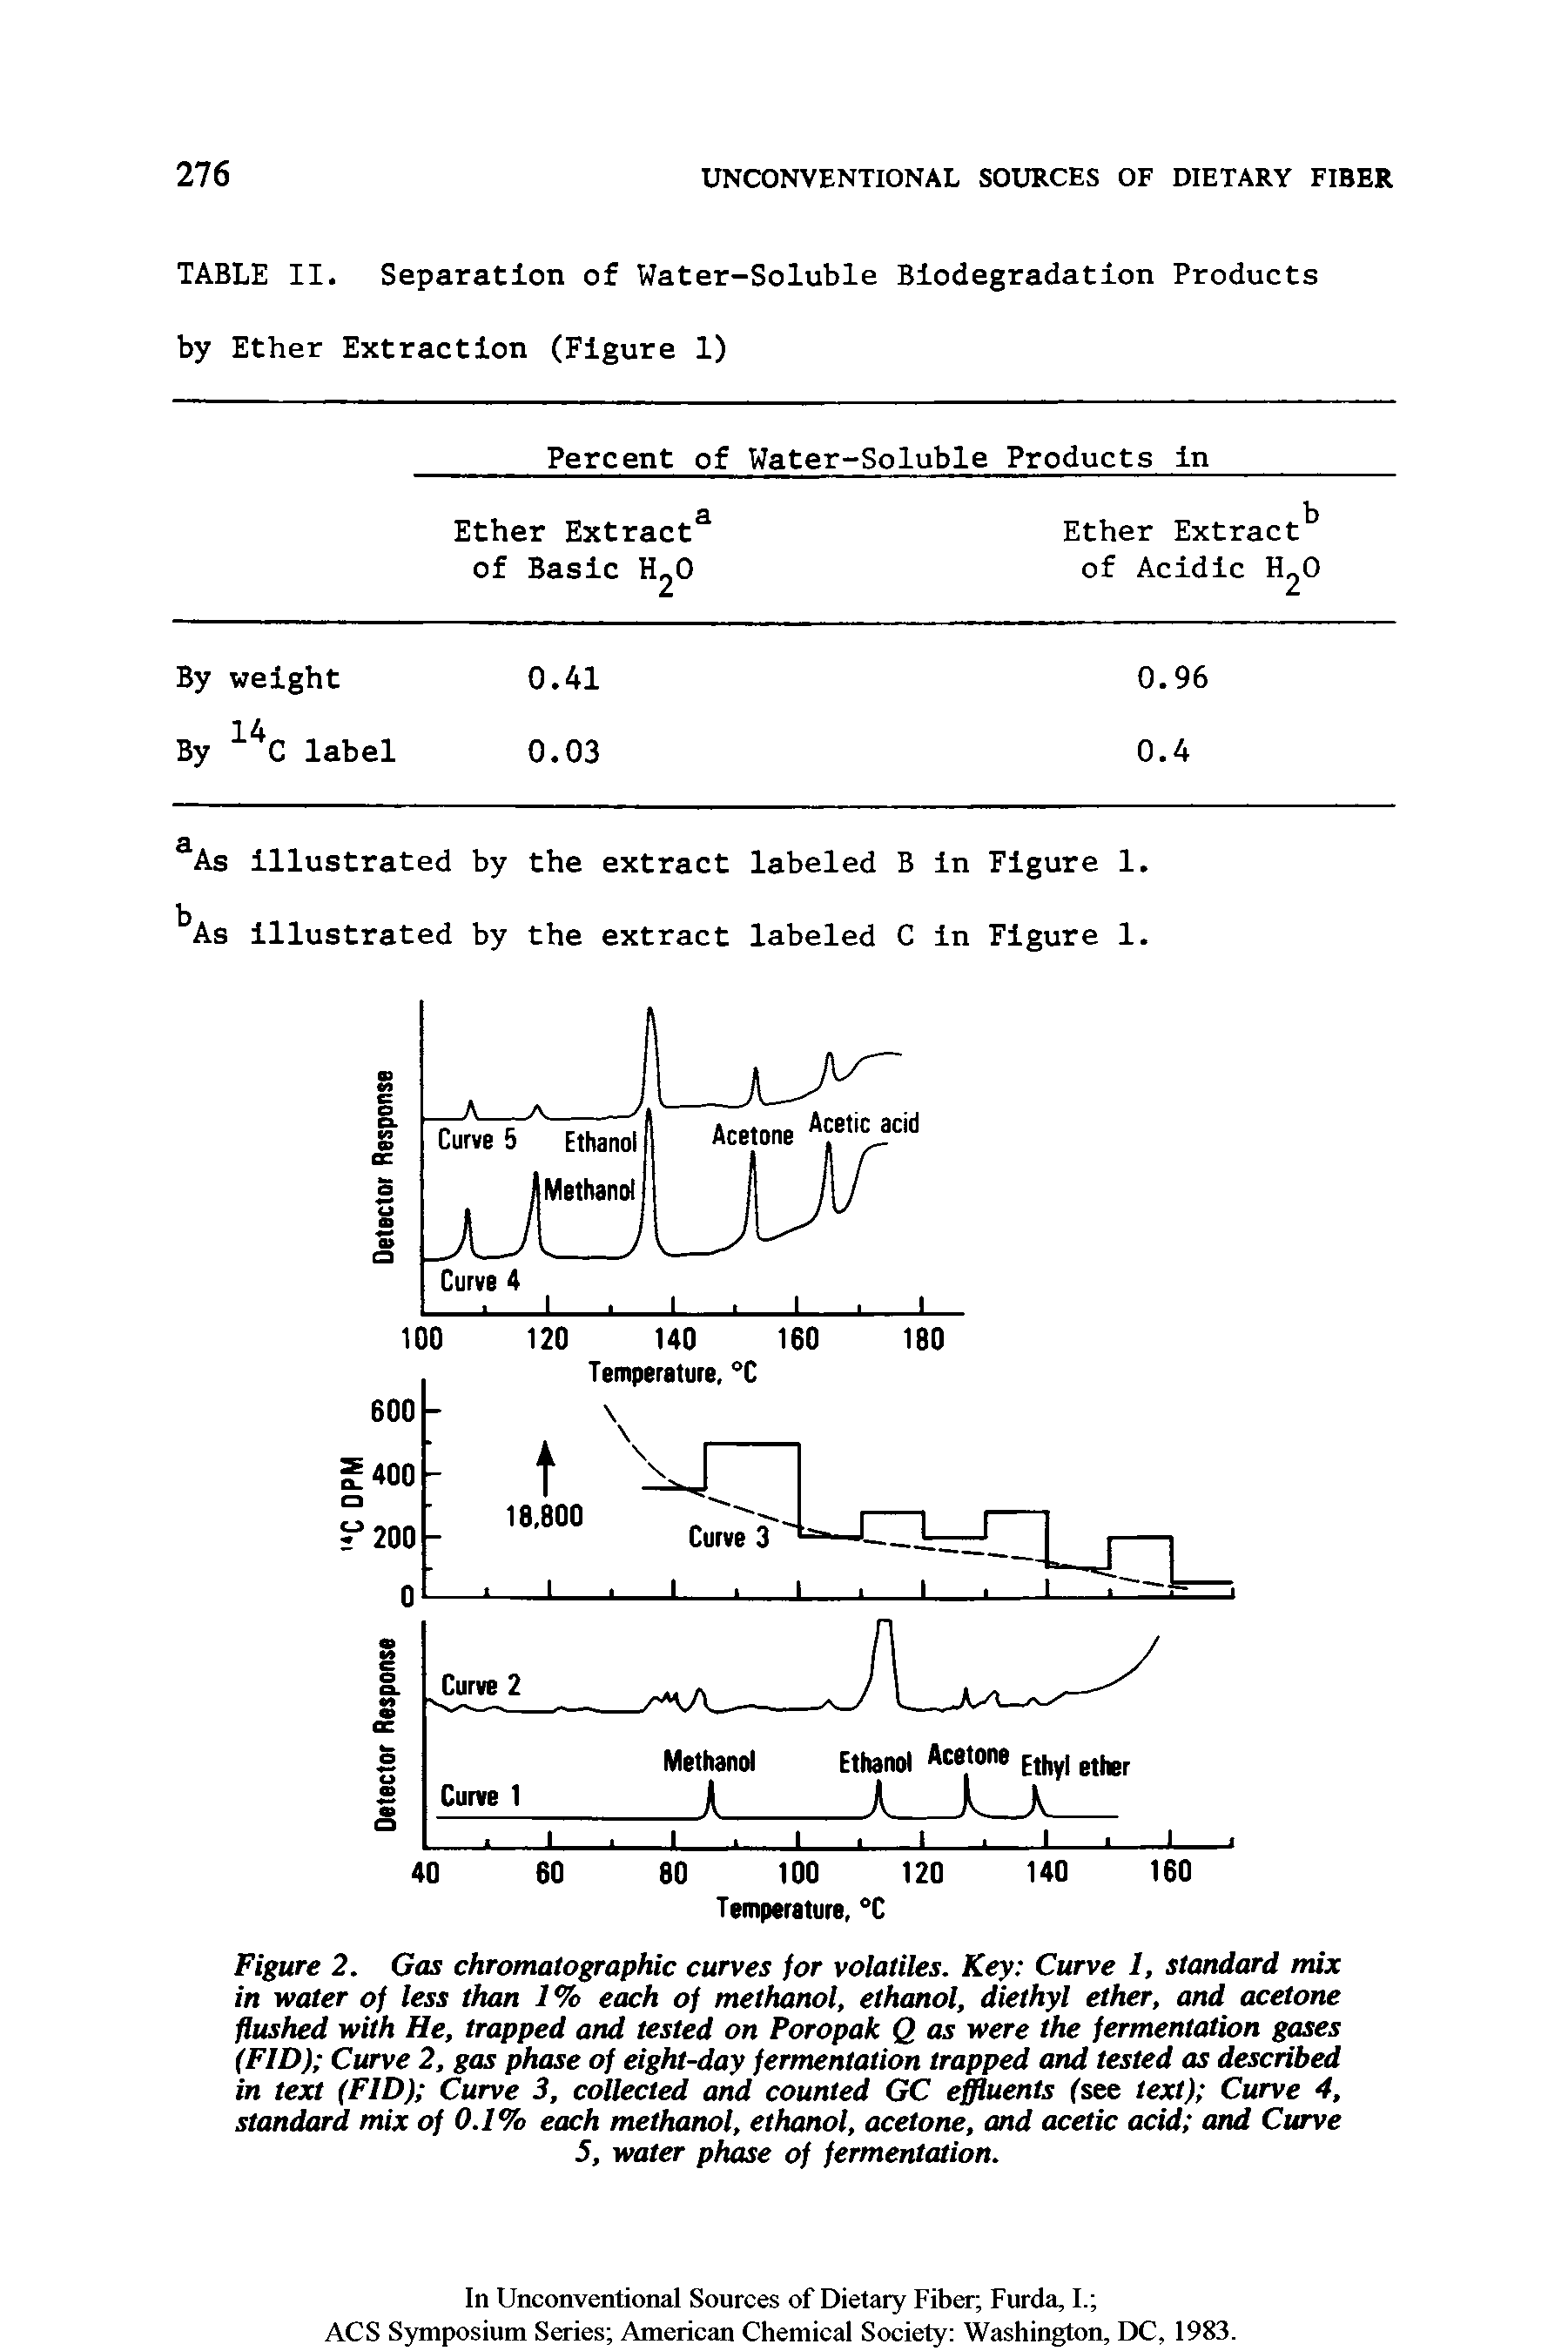 Figure 2. Gas chromatographic curves for volatiles. Key Curve 1, standard mix in water of less than 1% each of methanol, ethanol, diethyl ether, and acetone flushed with He, trapped and tested on Poropak Q as were the fermentation gases (FID) Curve 2, gas phase of eight-day fermentation trapped and tested as described in text (FID) Curve 3, collected and counted GC effluents (see text) Curve 4, standard mix of 0.1% each methanol, ethanol, acetone, and acetic acid and Curve 5, water phase of fermentation.